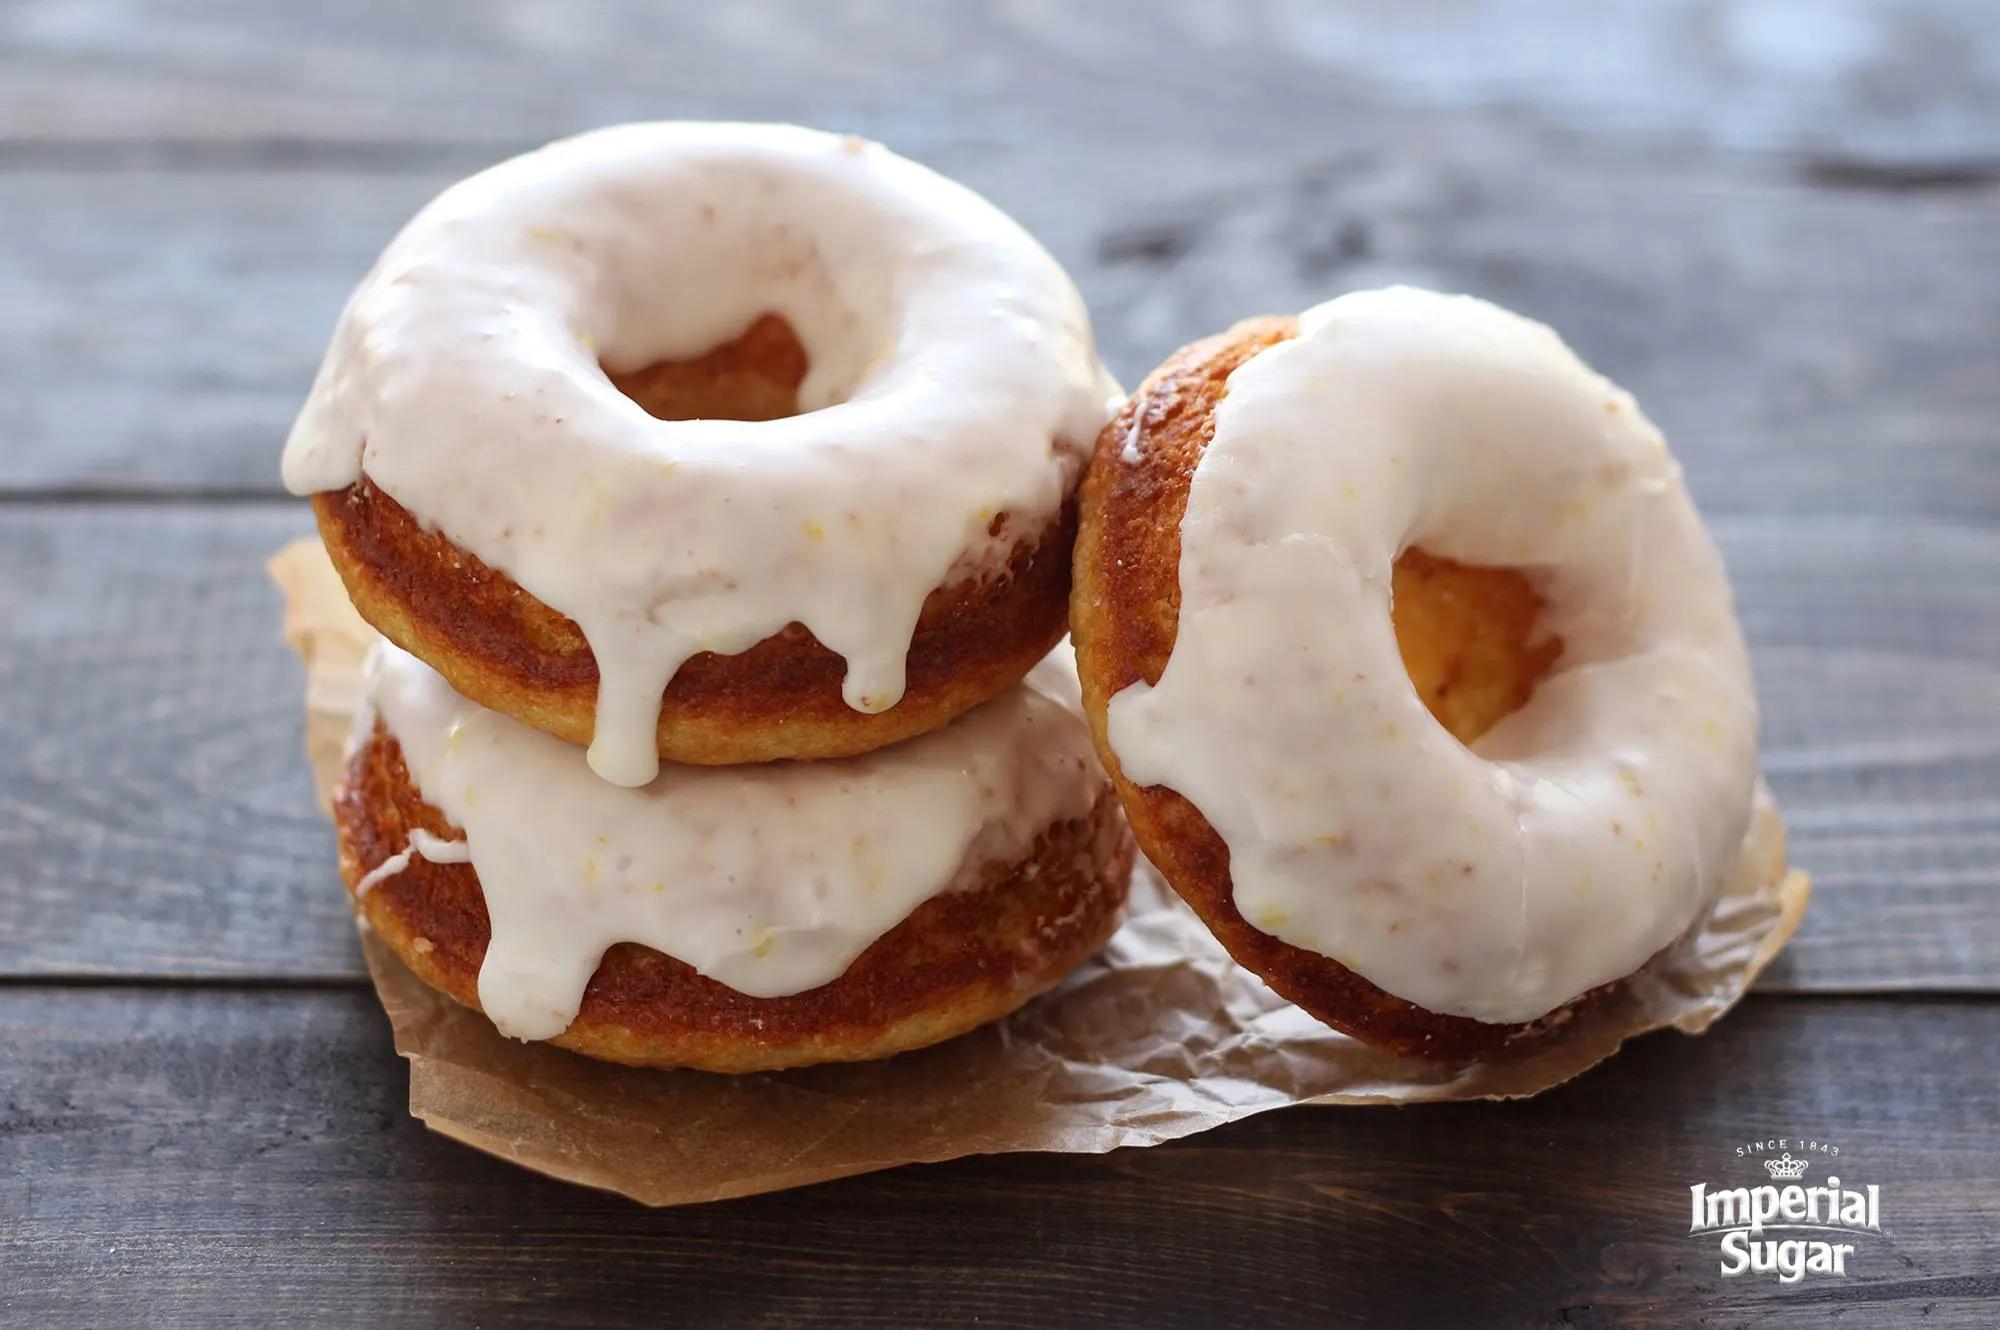 Baked Doughnuts with Lemon Glaze | Imperial Sugar